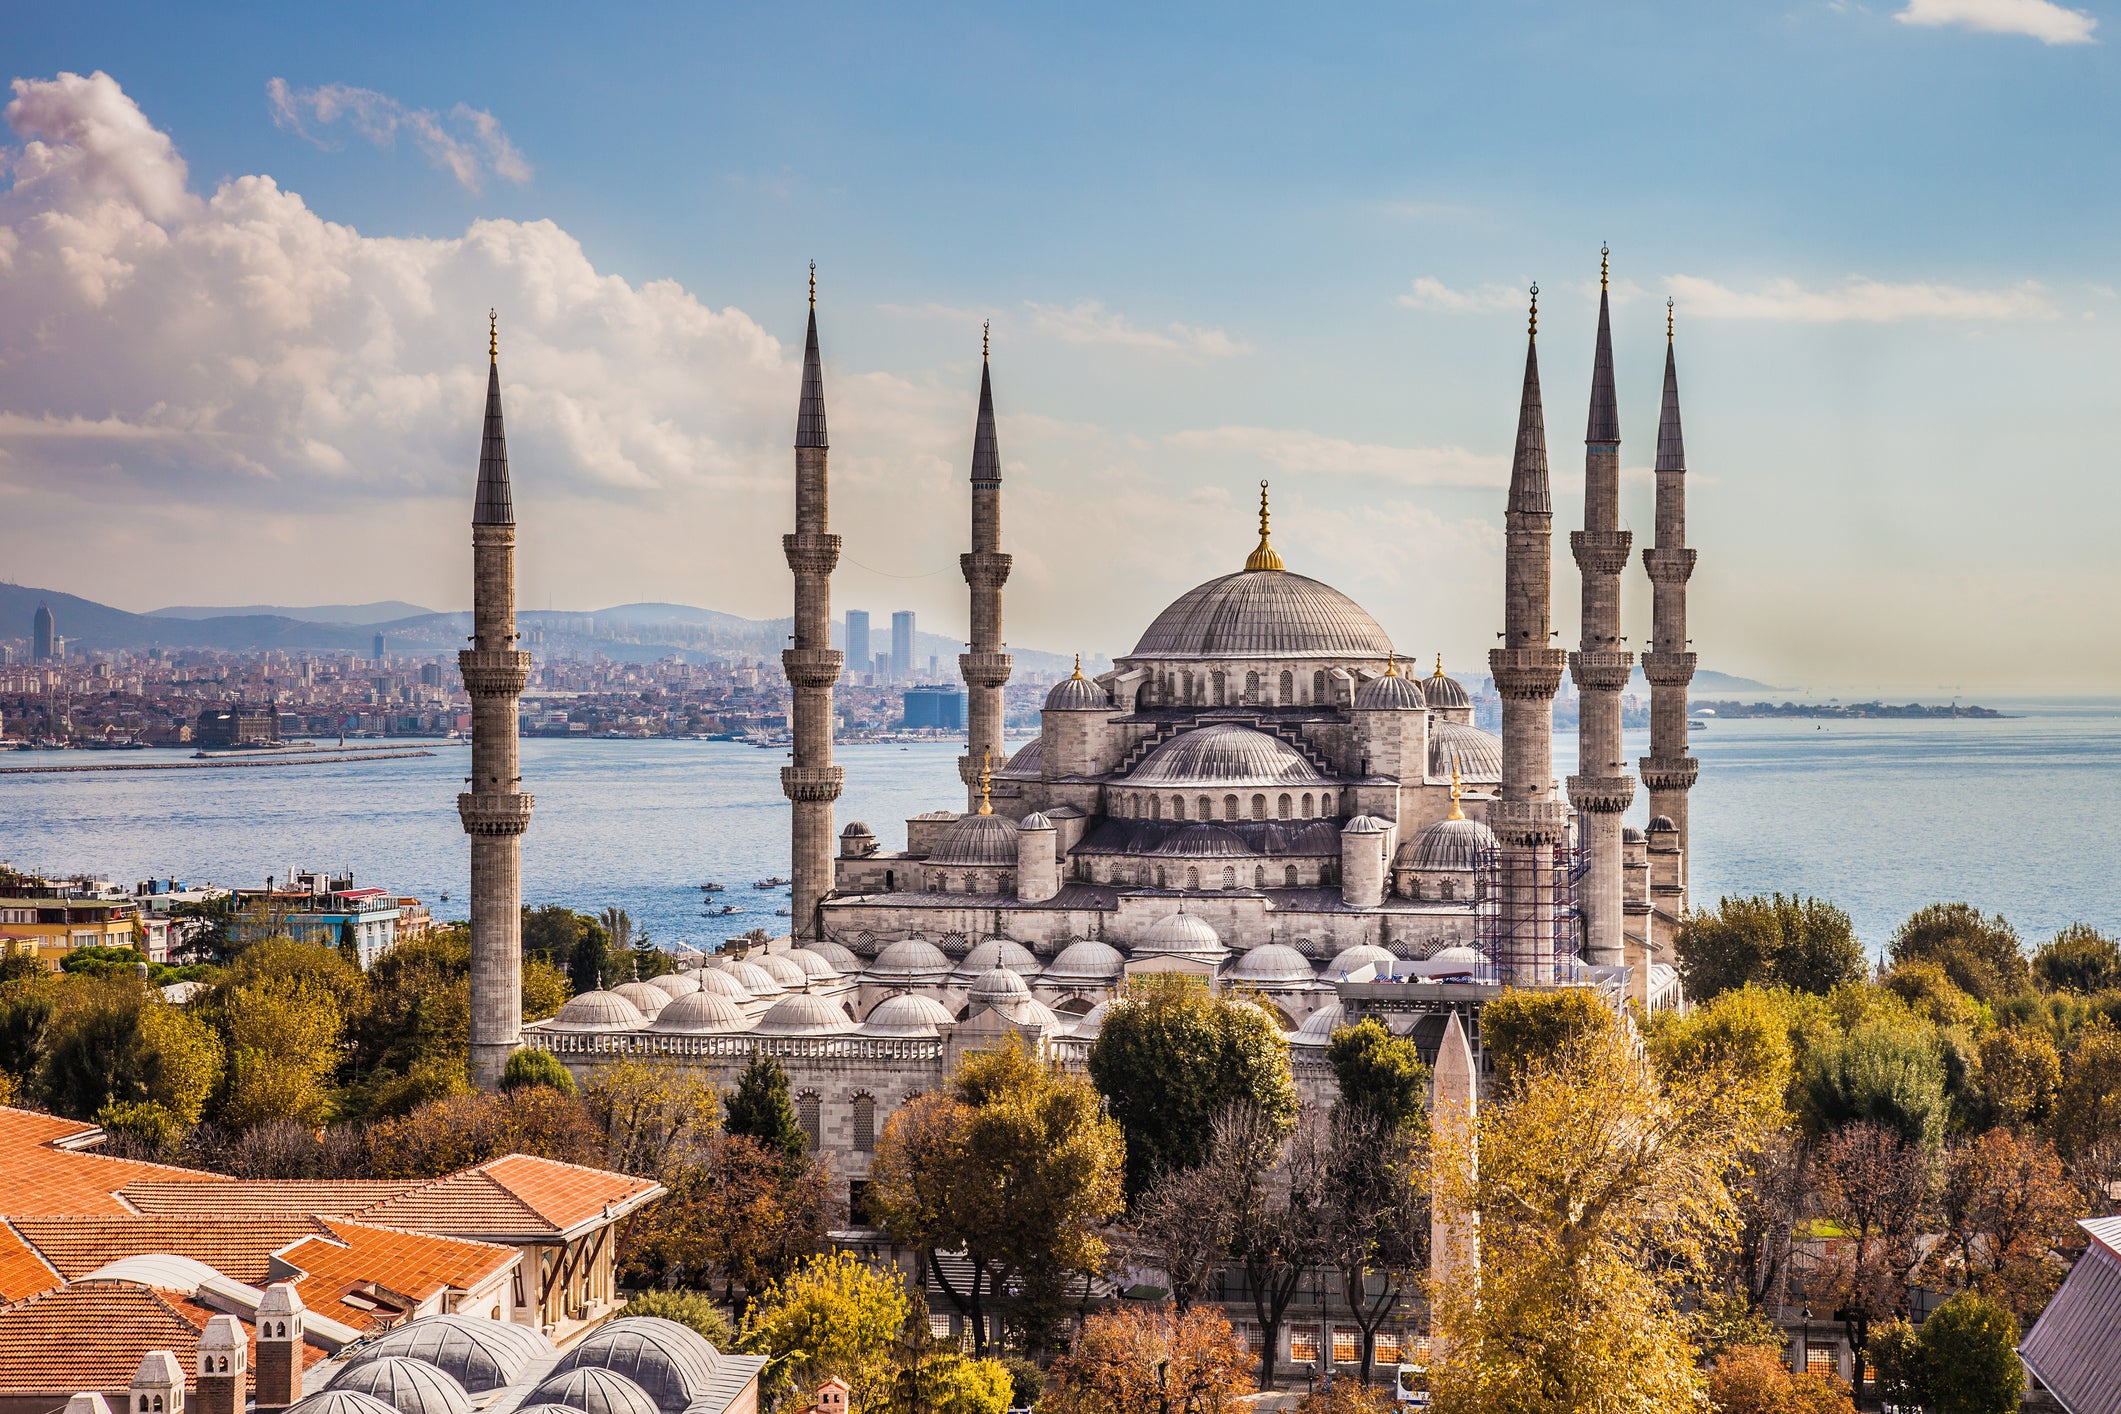 The Sultan Ahmet or Blue Mosque in Istanbul, Turkey